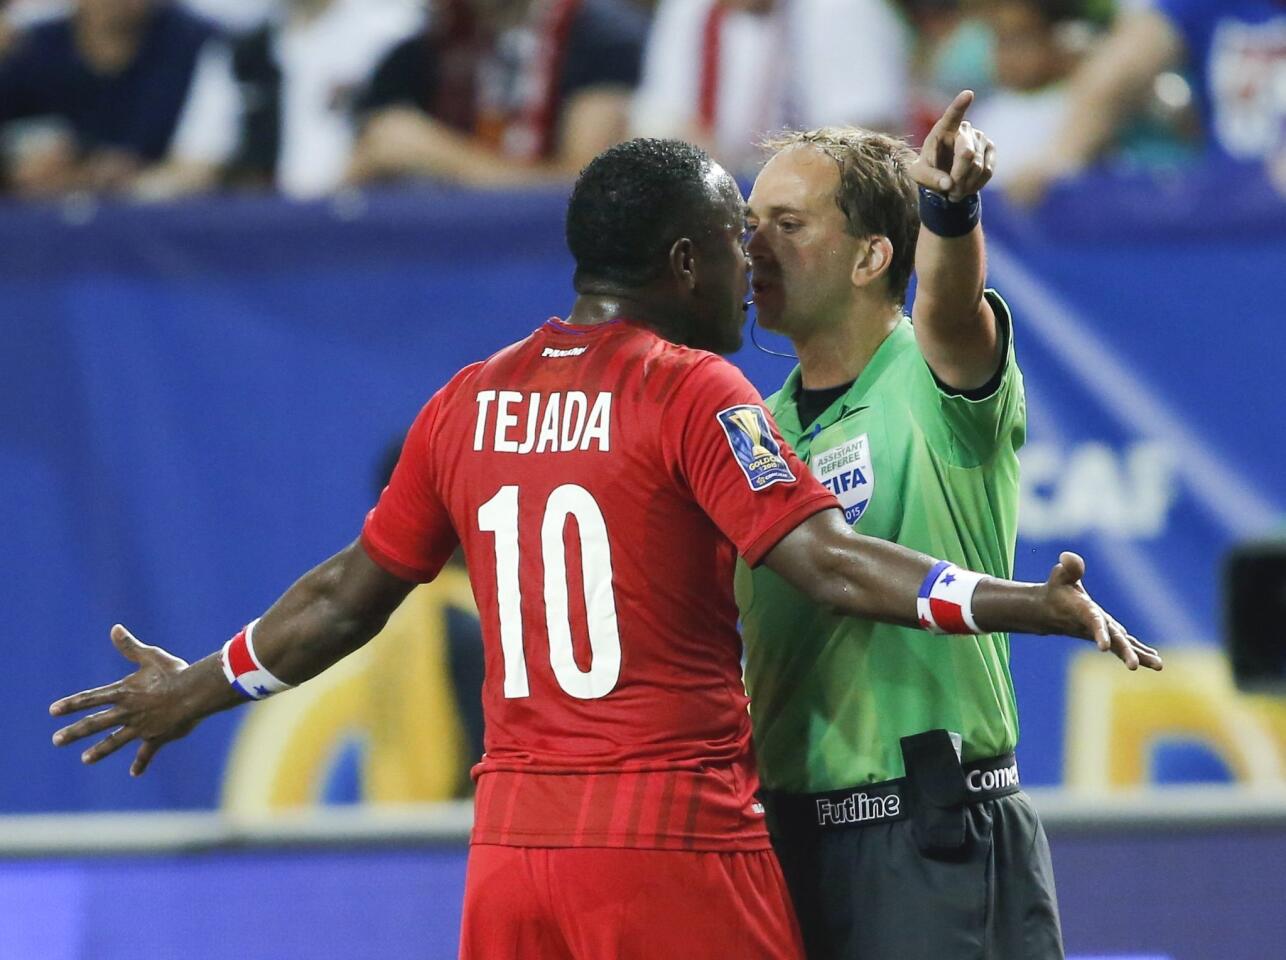 Panama's Luis Tejada (10) argues with an official during the first half against Mexico in a CONCACAF Gold Cup soccer semifinal, Wednesday, July 22, 2015, in Atlanta. (AP Photo/John Bazemore)